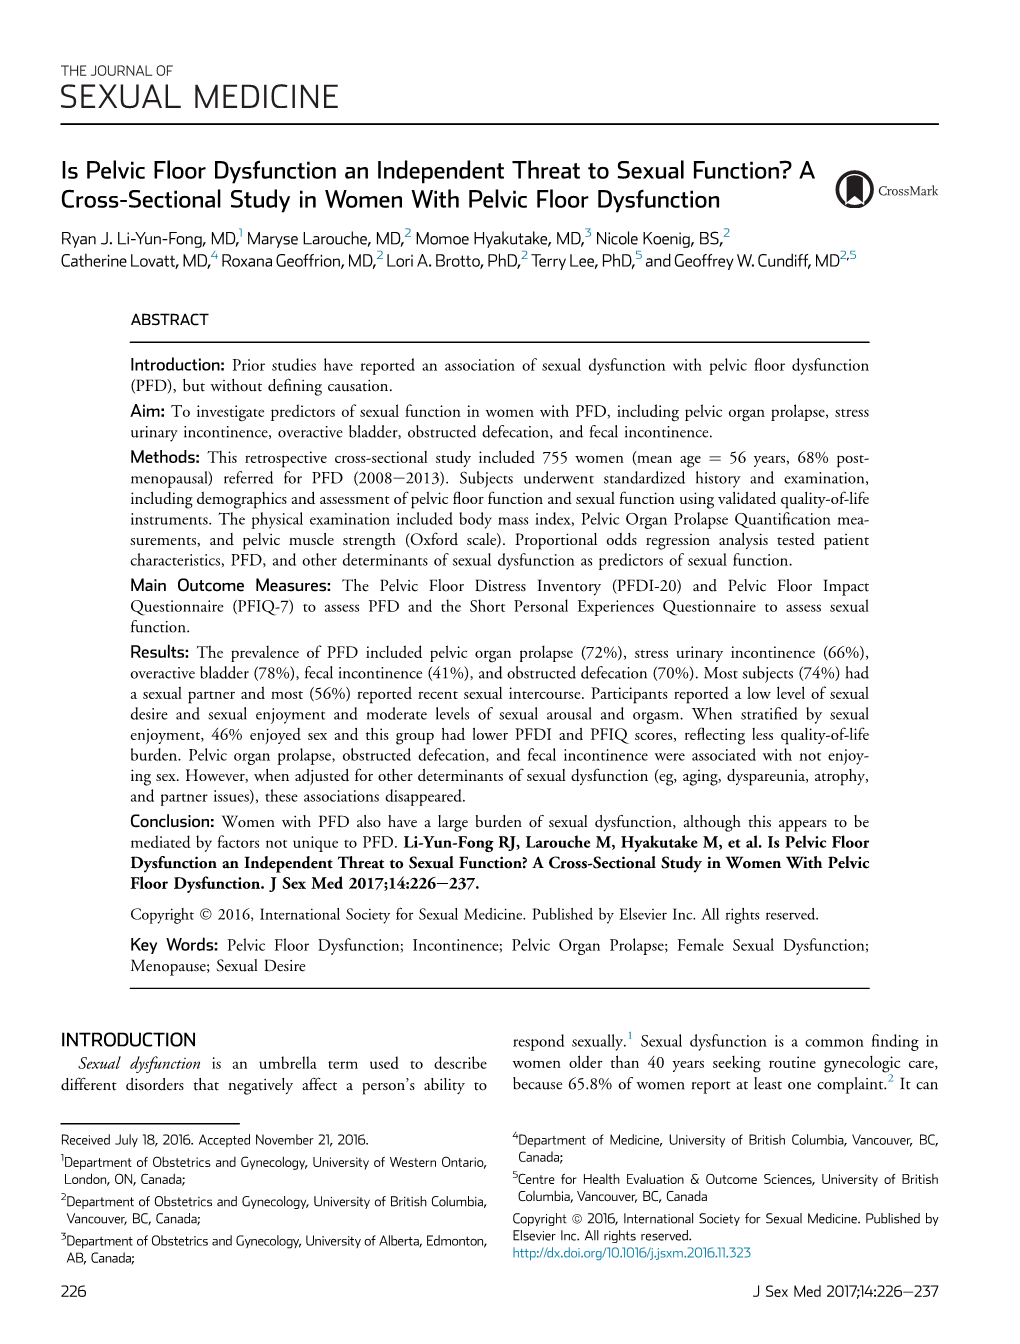 Is Pelvic Floor Dysfunction an Independent Threat to Sexual Function? a Cross-Sectional Study in Women with Pelvic Floor Dysfunction